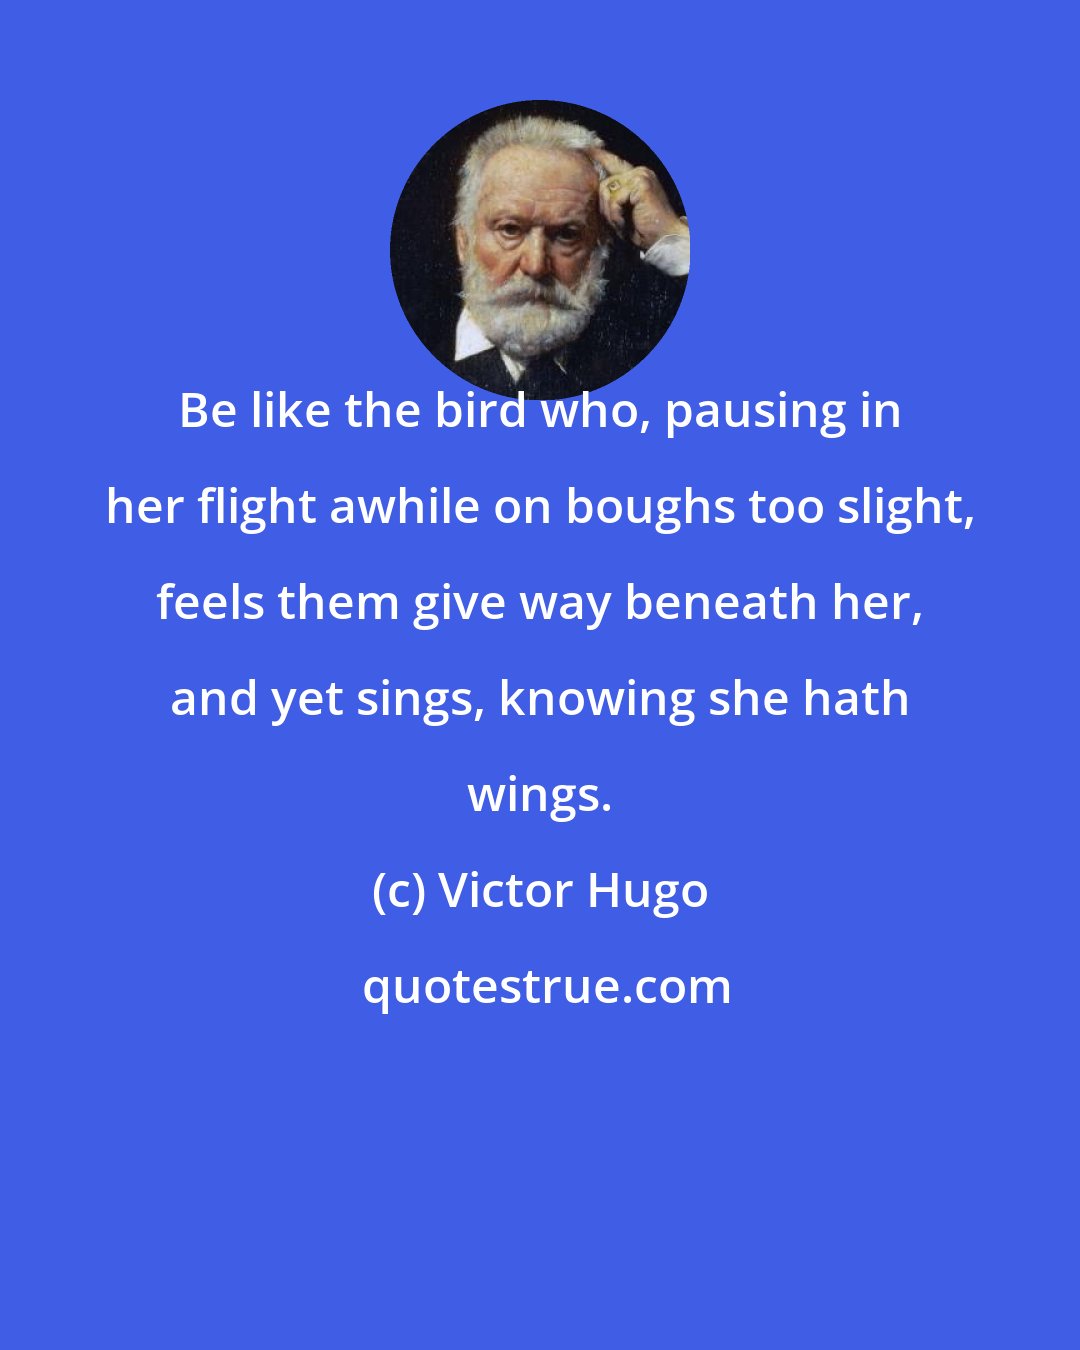 Victor Hugo: Be like the bird who, pausing in her flight awhile on boughs too slight, feels them give way beneath her, and yet sings, knowing she hath wings.